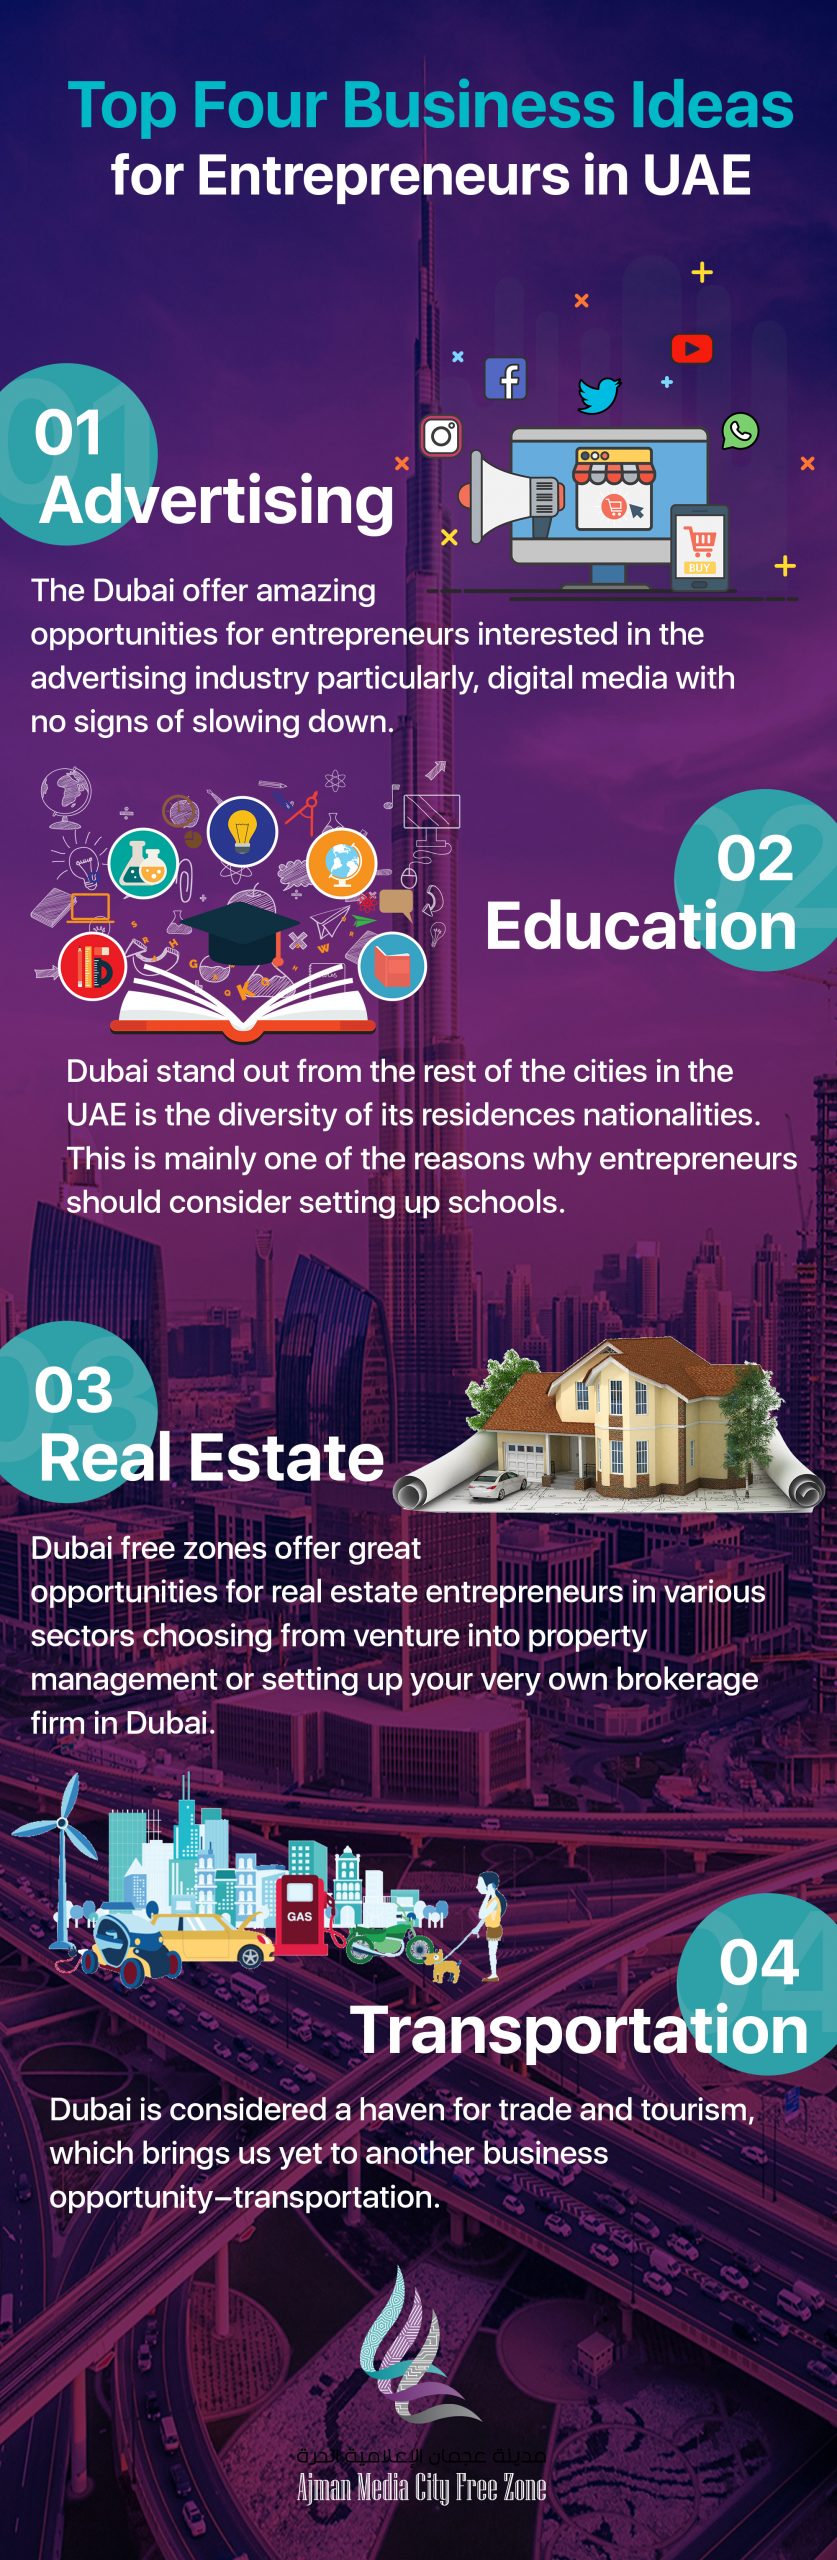 Top Four Business Ideas for Entrepreneurs in UAE